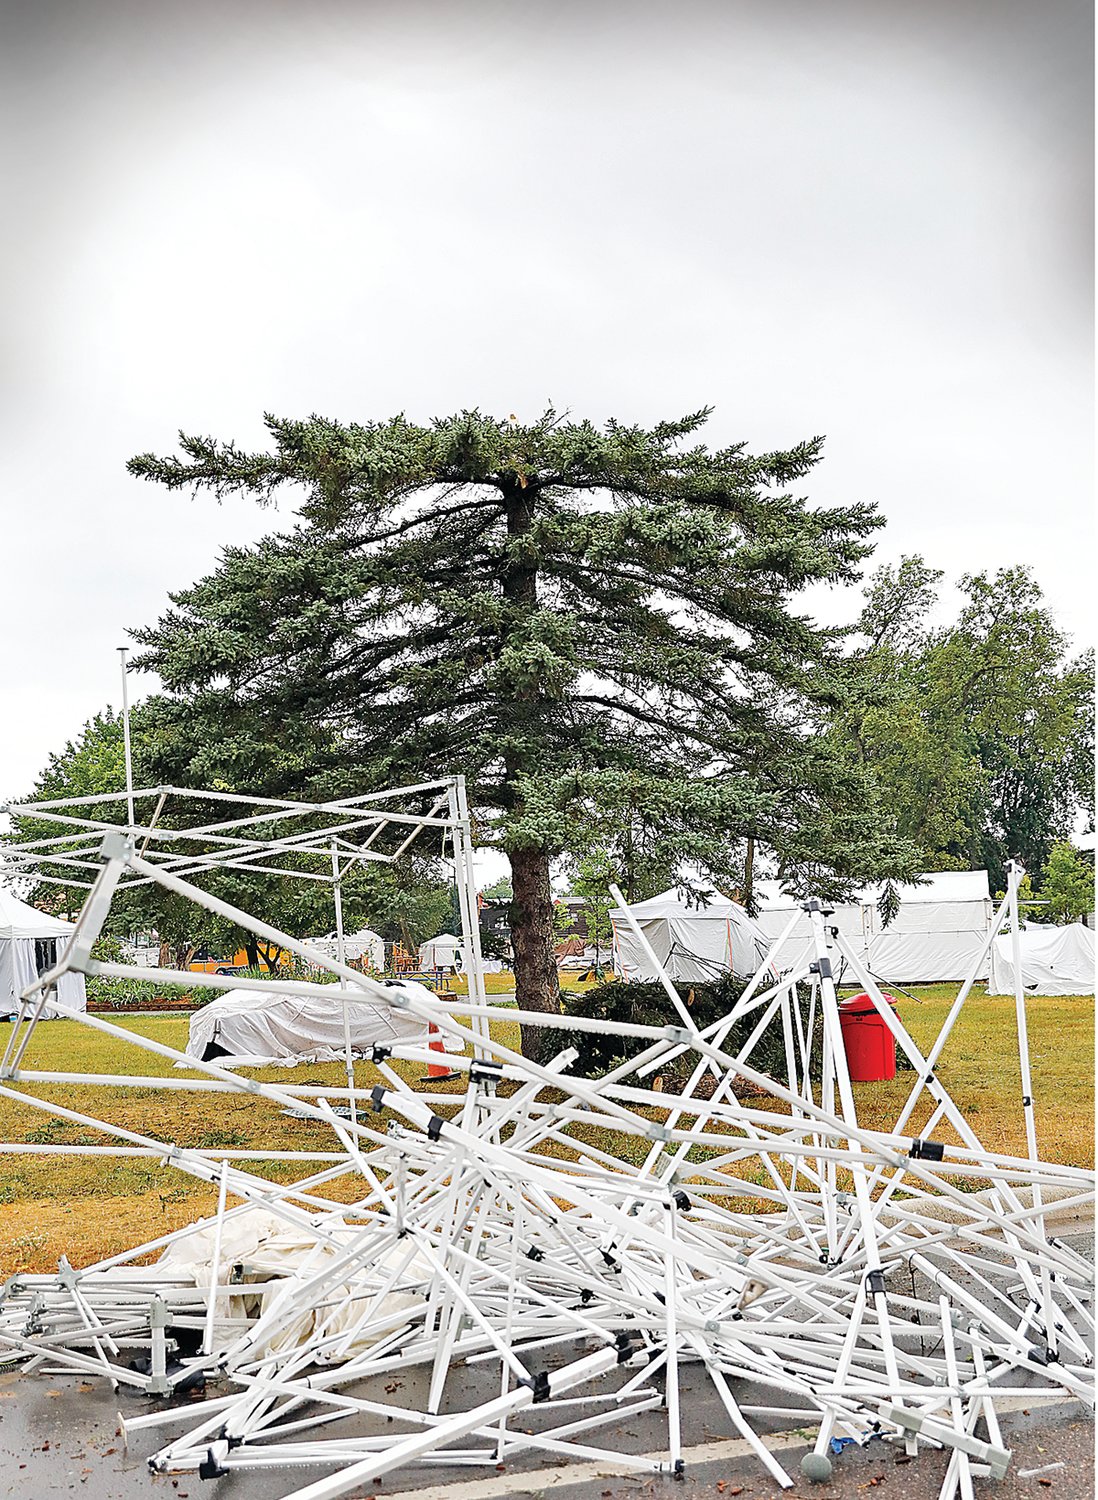 A mangled tent frame in Whiteside Park was piled in front of a busted off spruce tree.